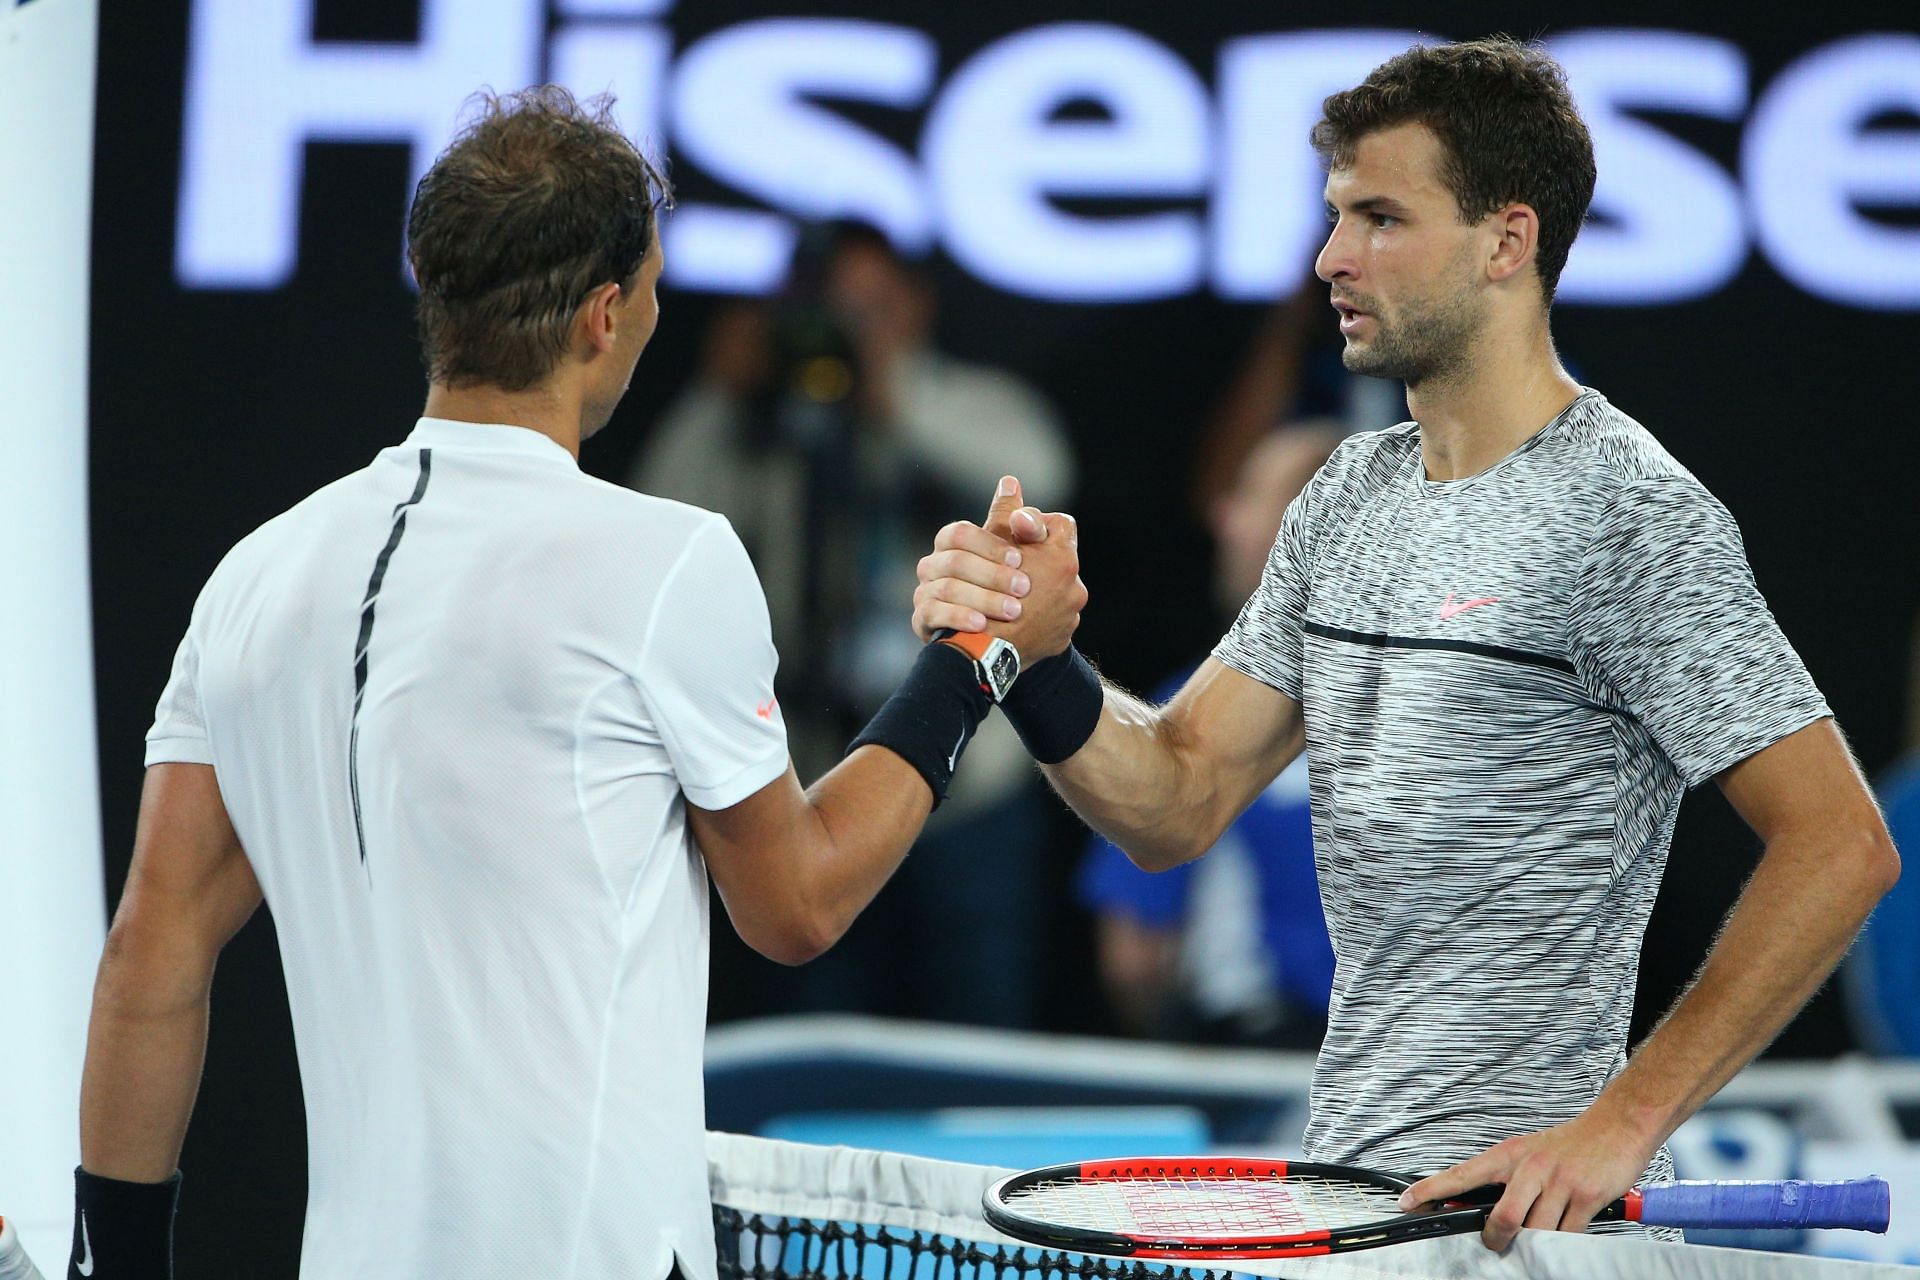 Rafael Nadal and Grigor Dimitrov embrace after their 2017 Australian Open clash